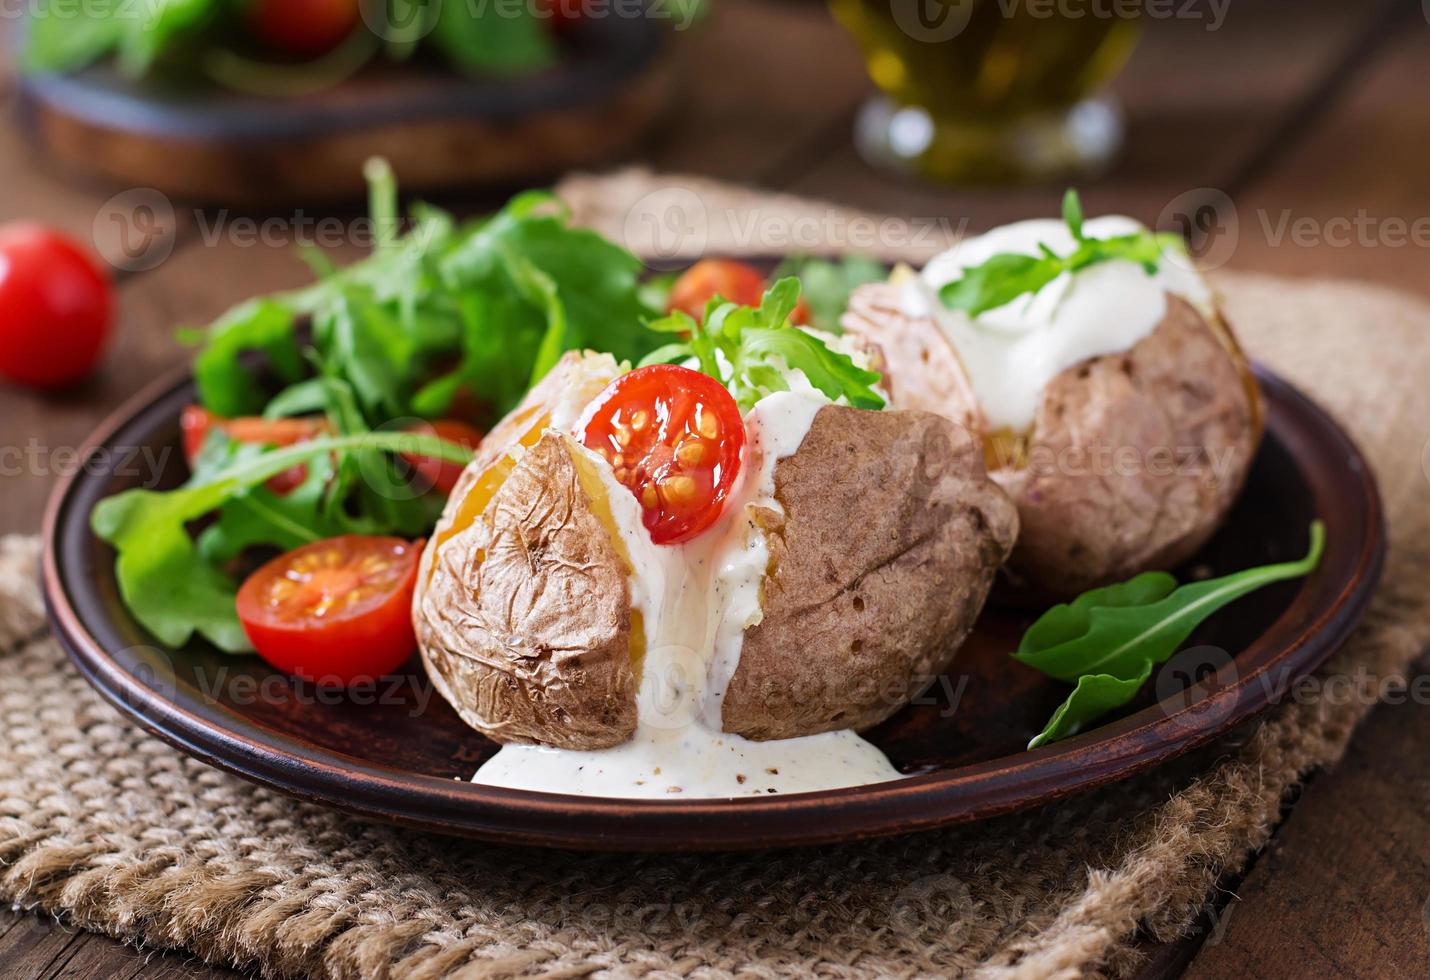 Baked potato filled with sour cream, arugula and tomatoes photo